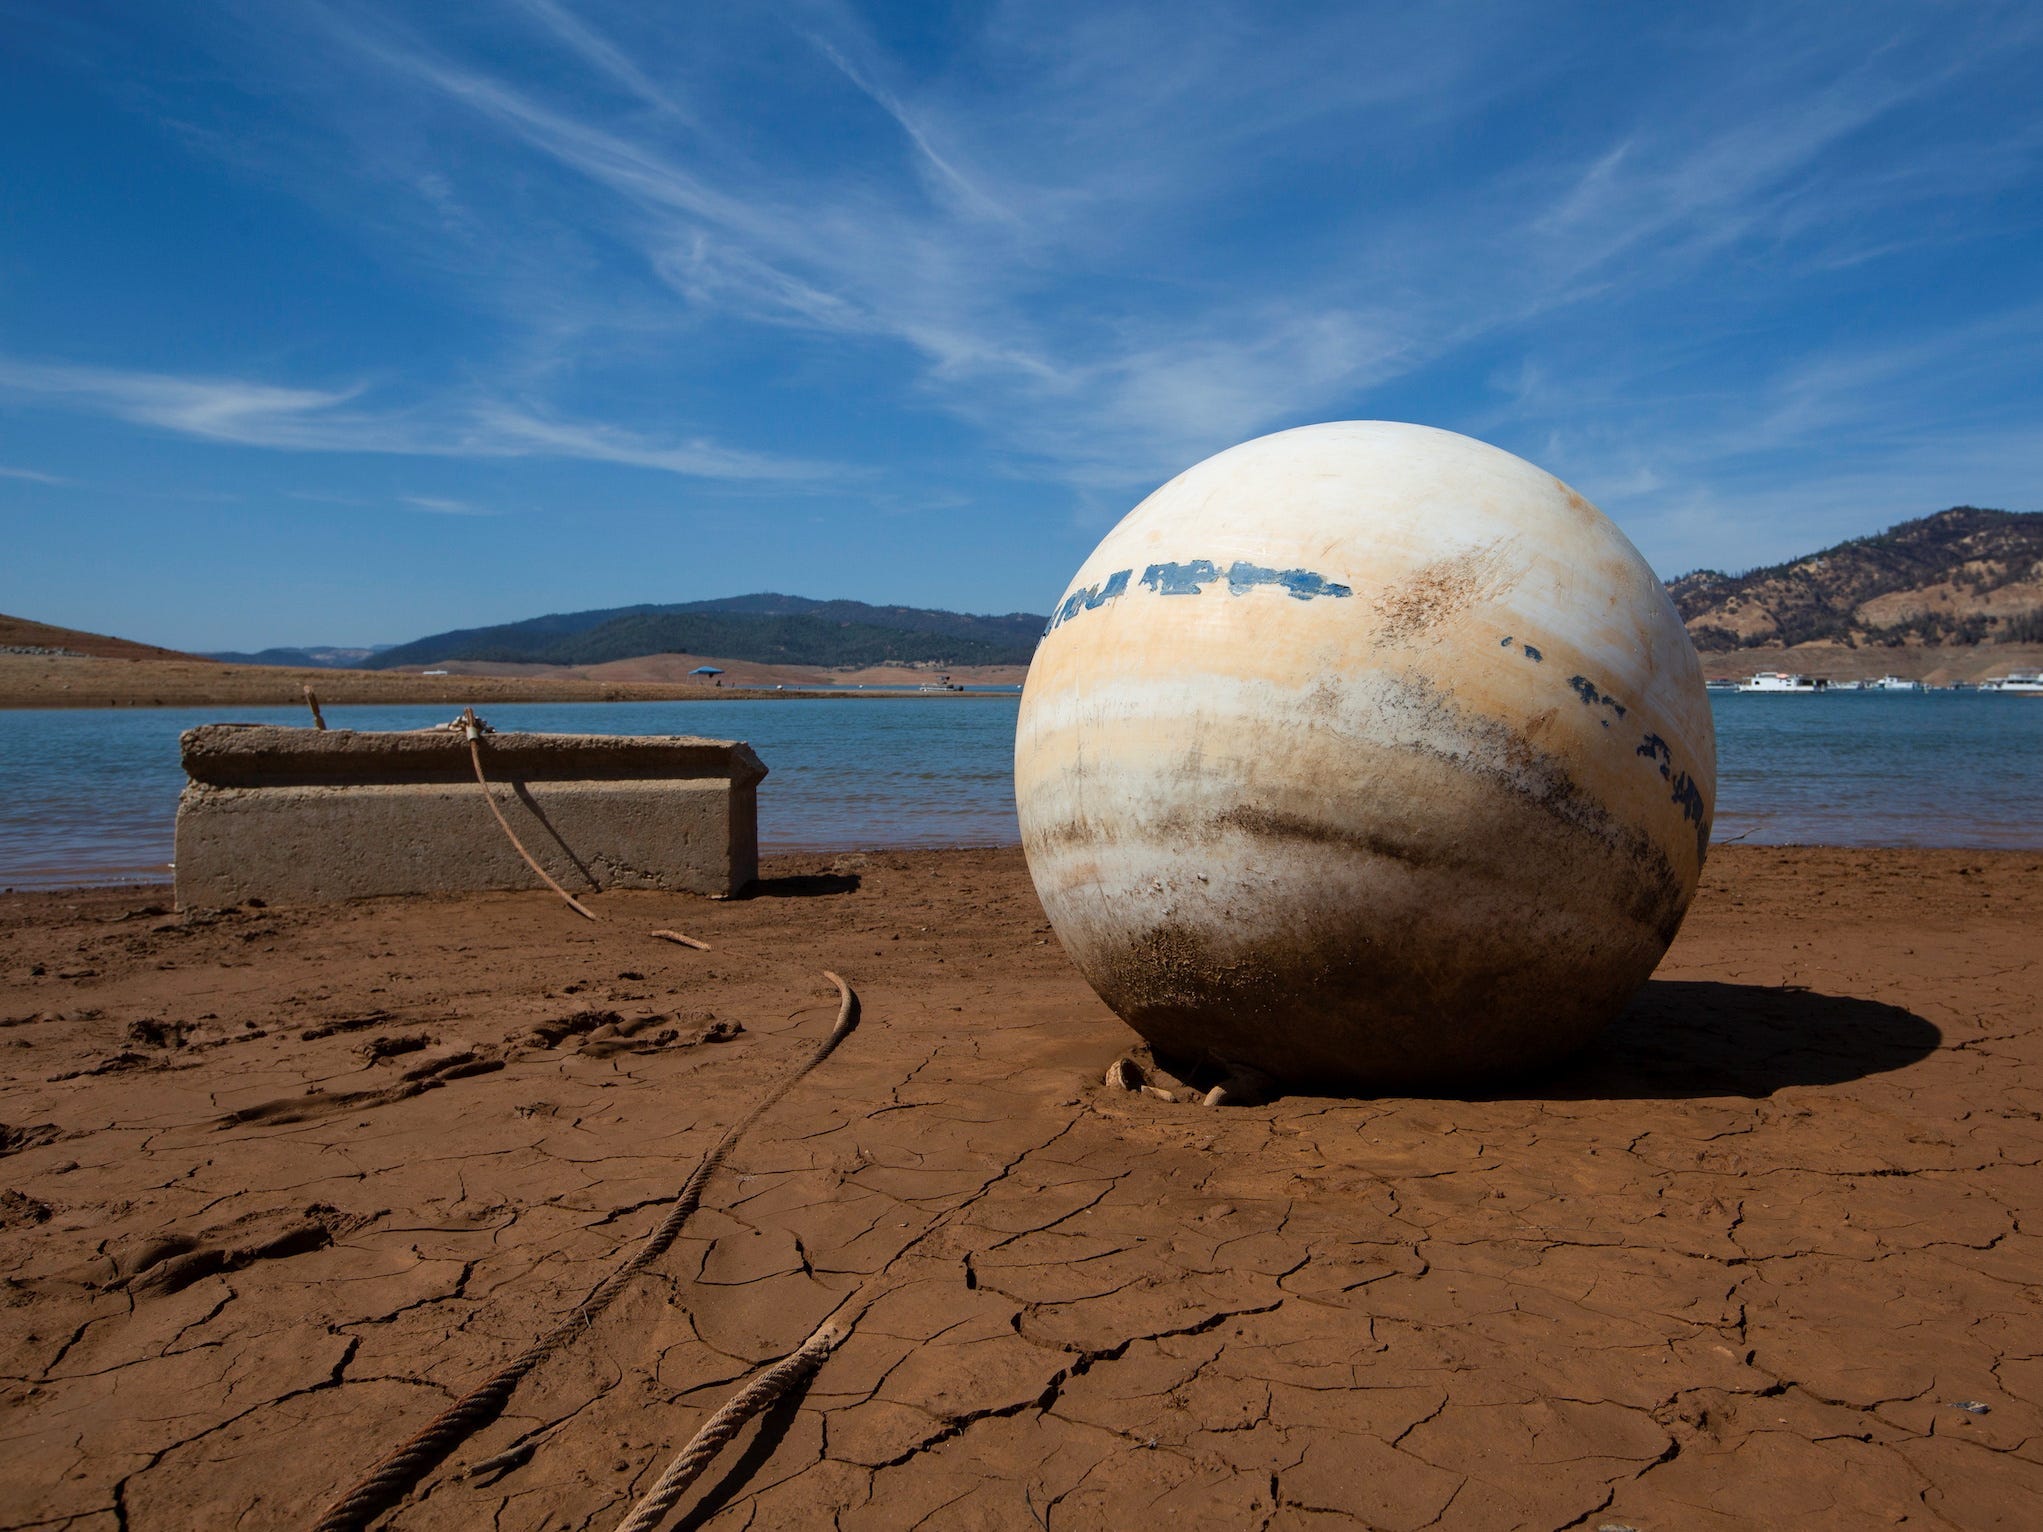 buoy and concrete anchor lay on cracked ground where lake oroville has dried up